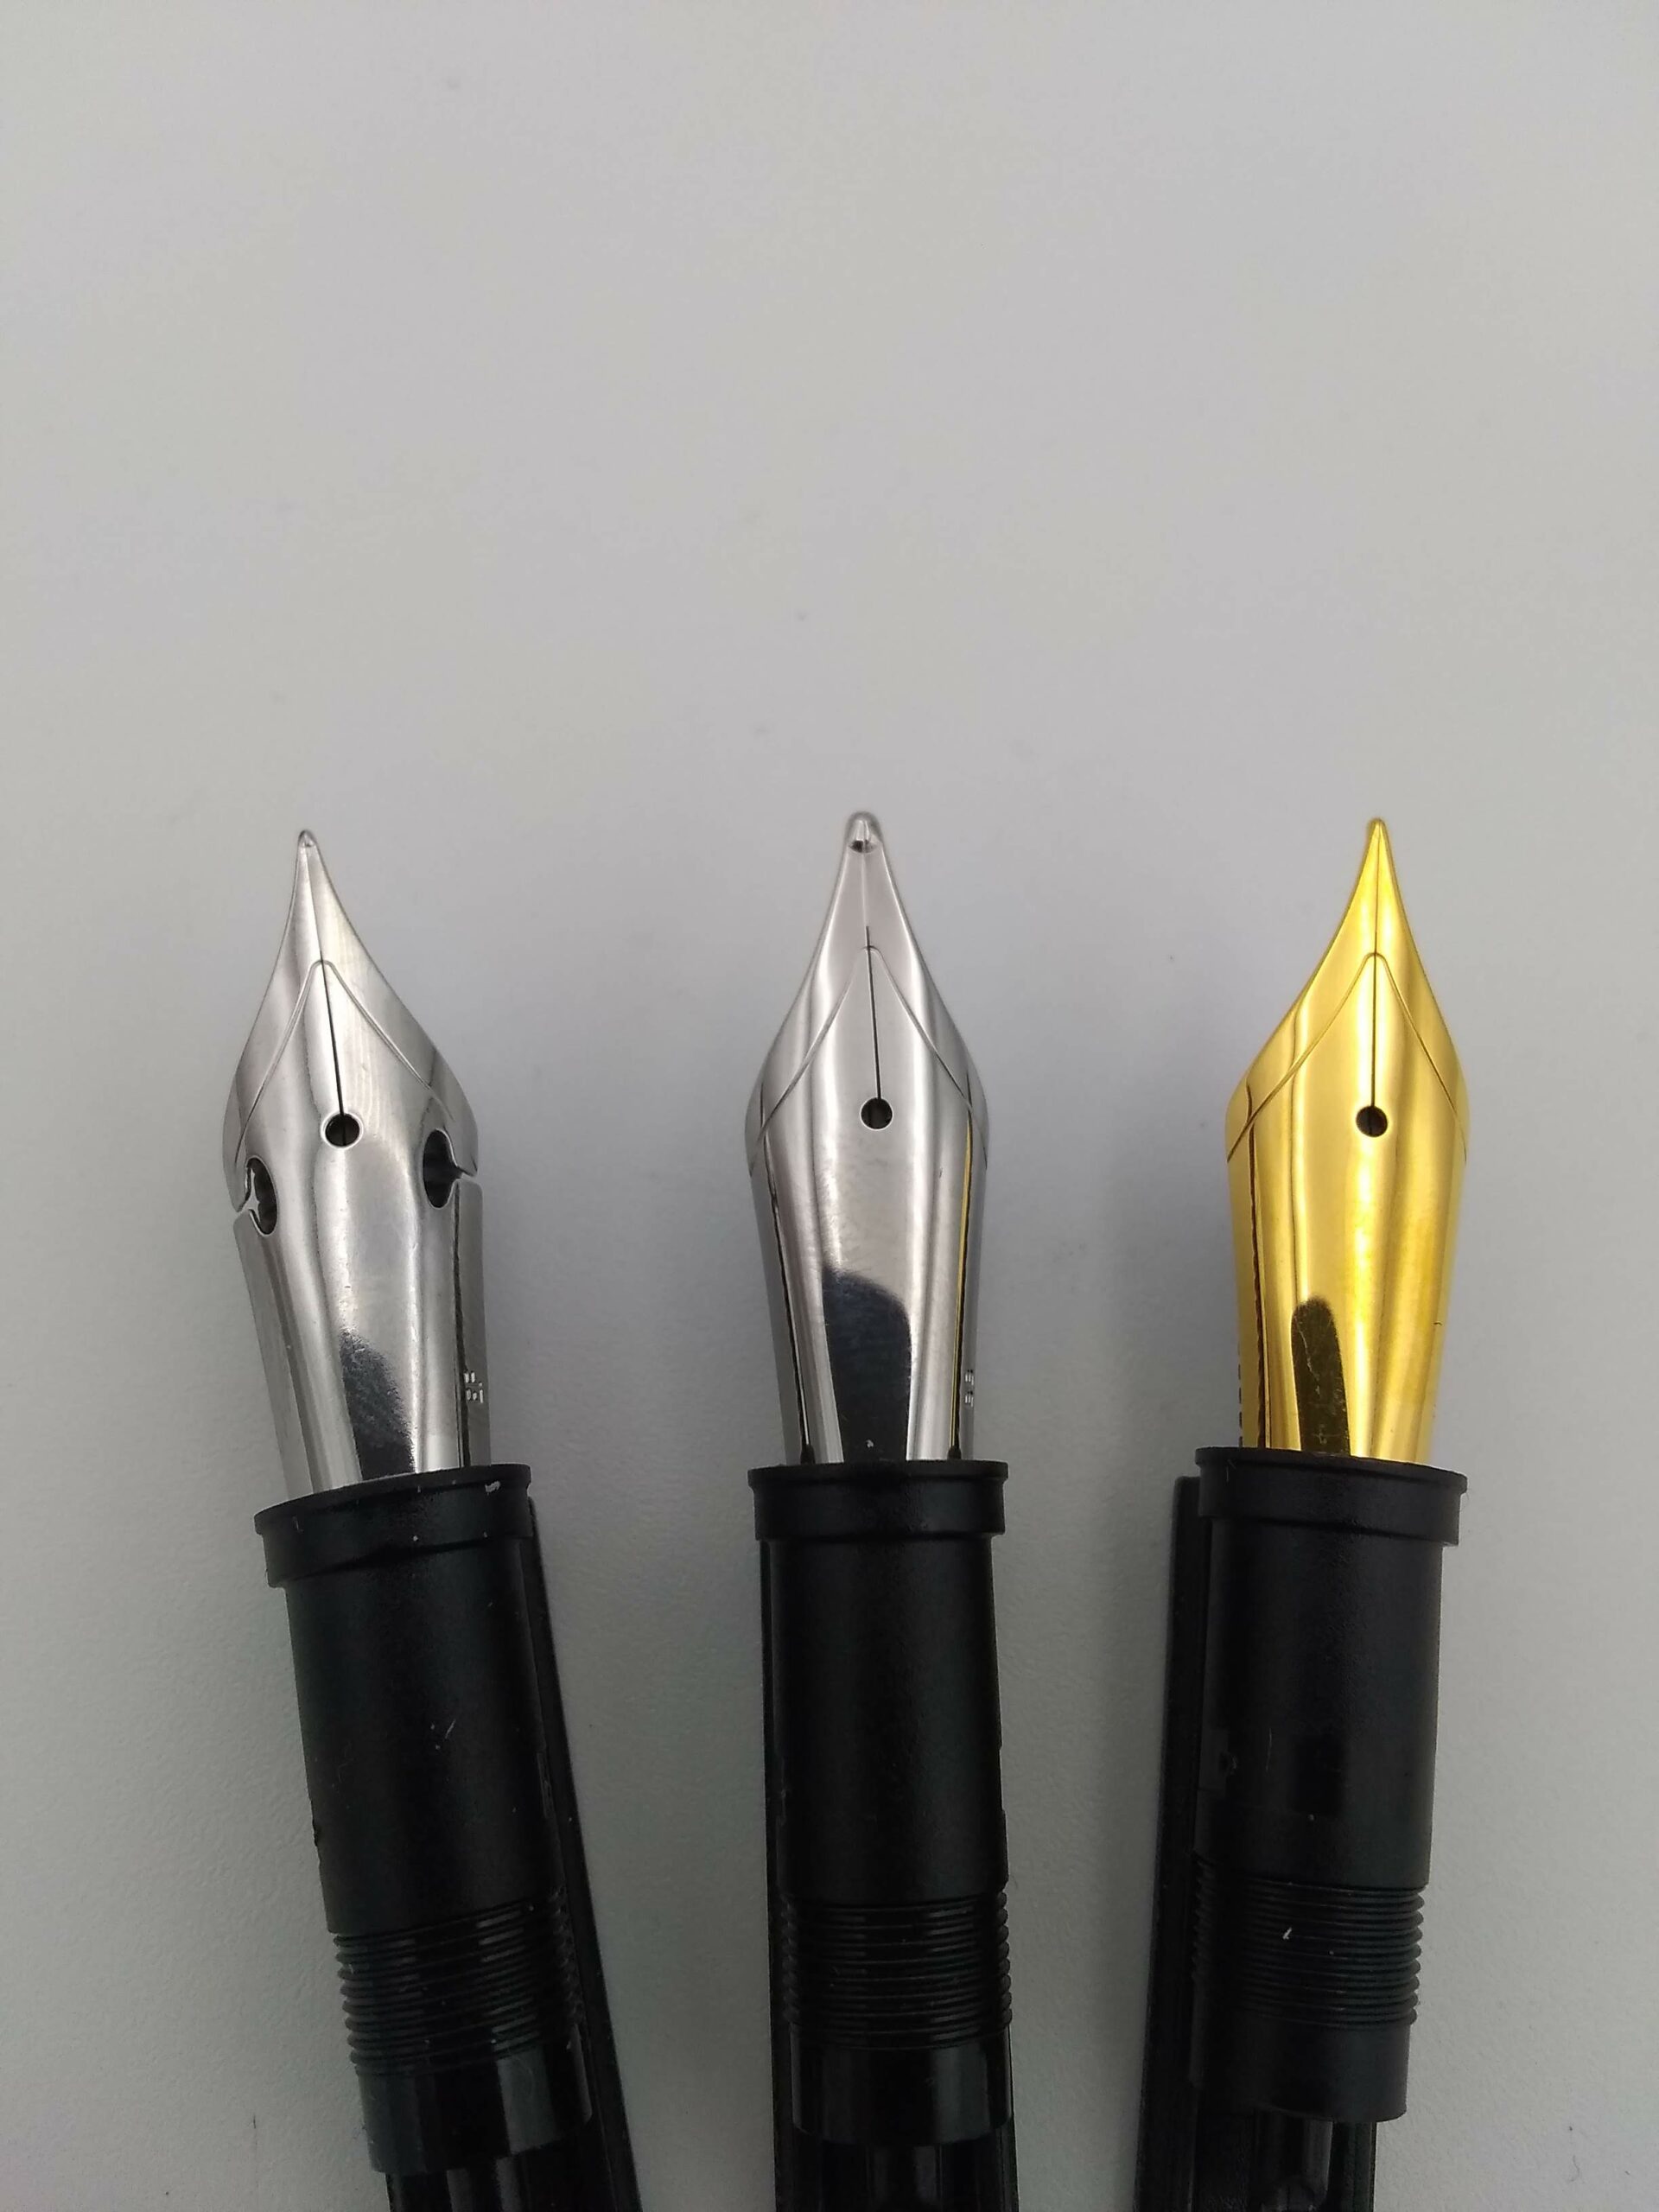 Size #6 Nib - Stainless Steel - Gold-plated Nib